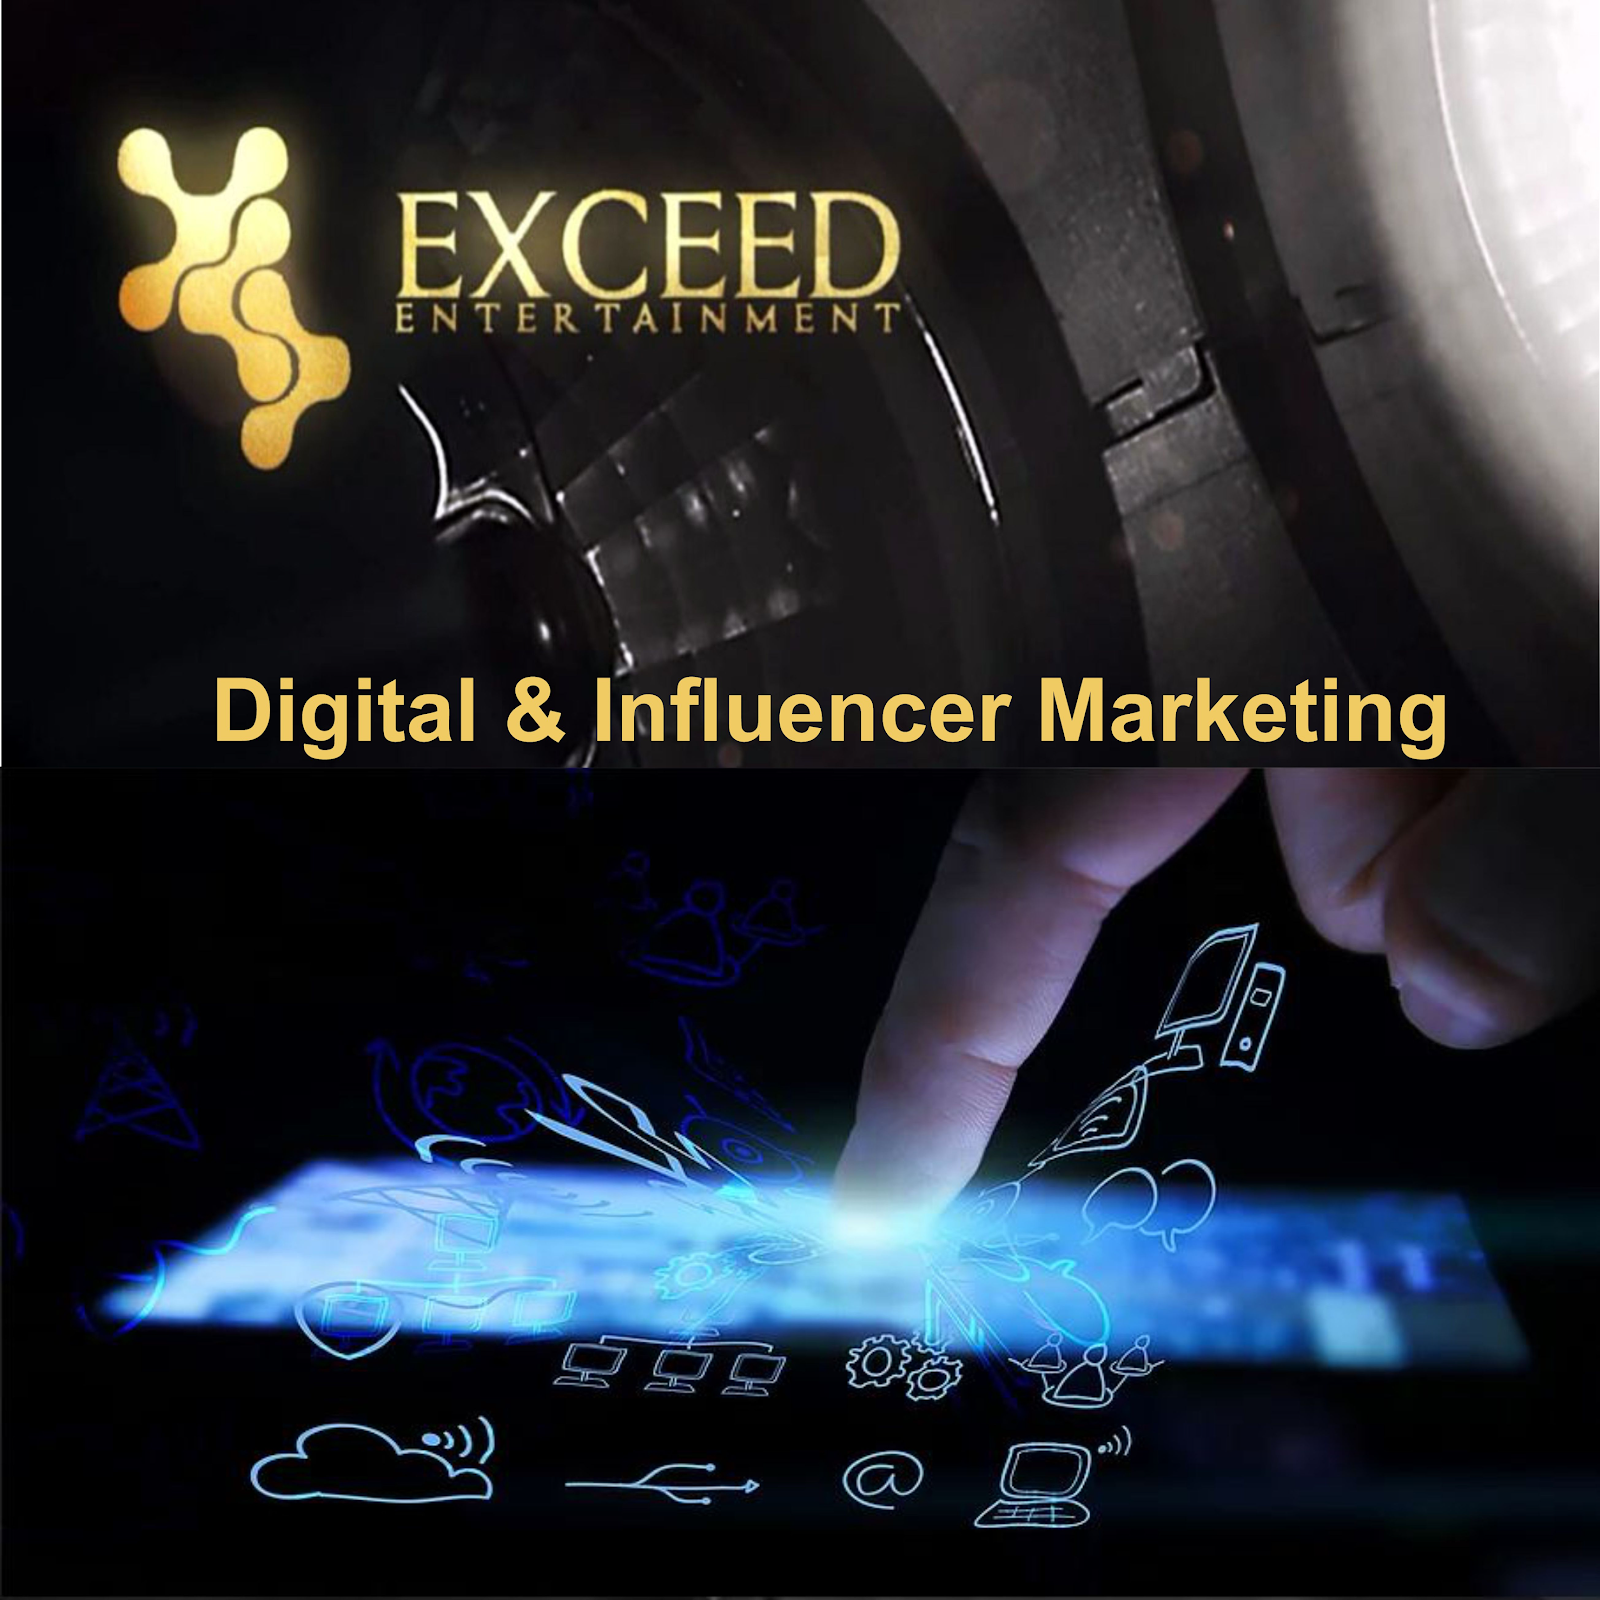 digital influencer marketing india -exceed entertainment